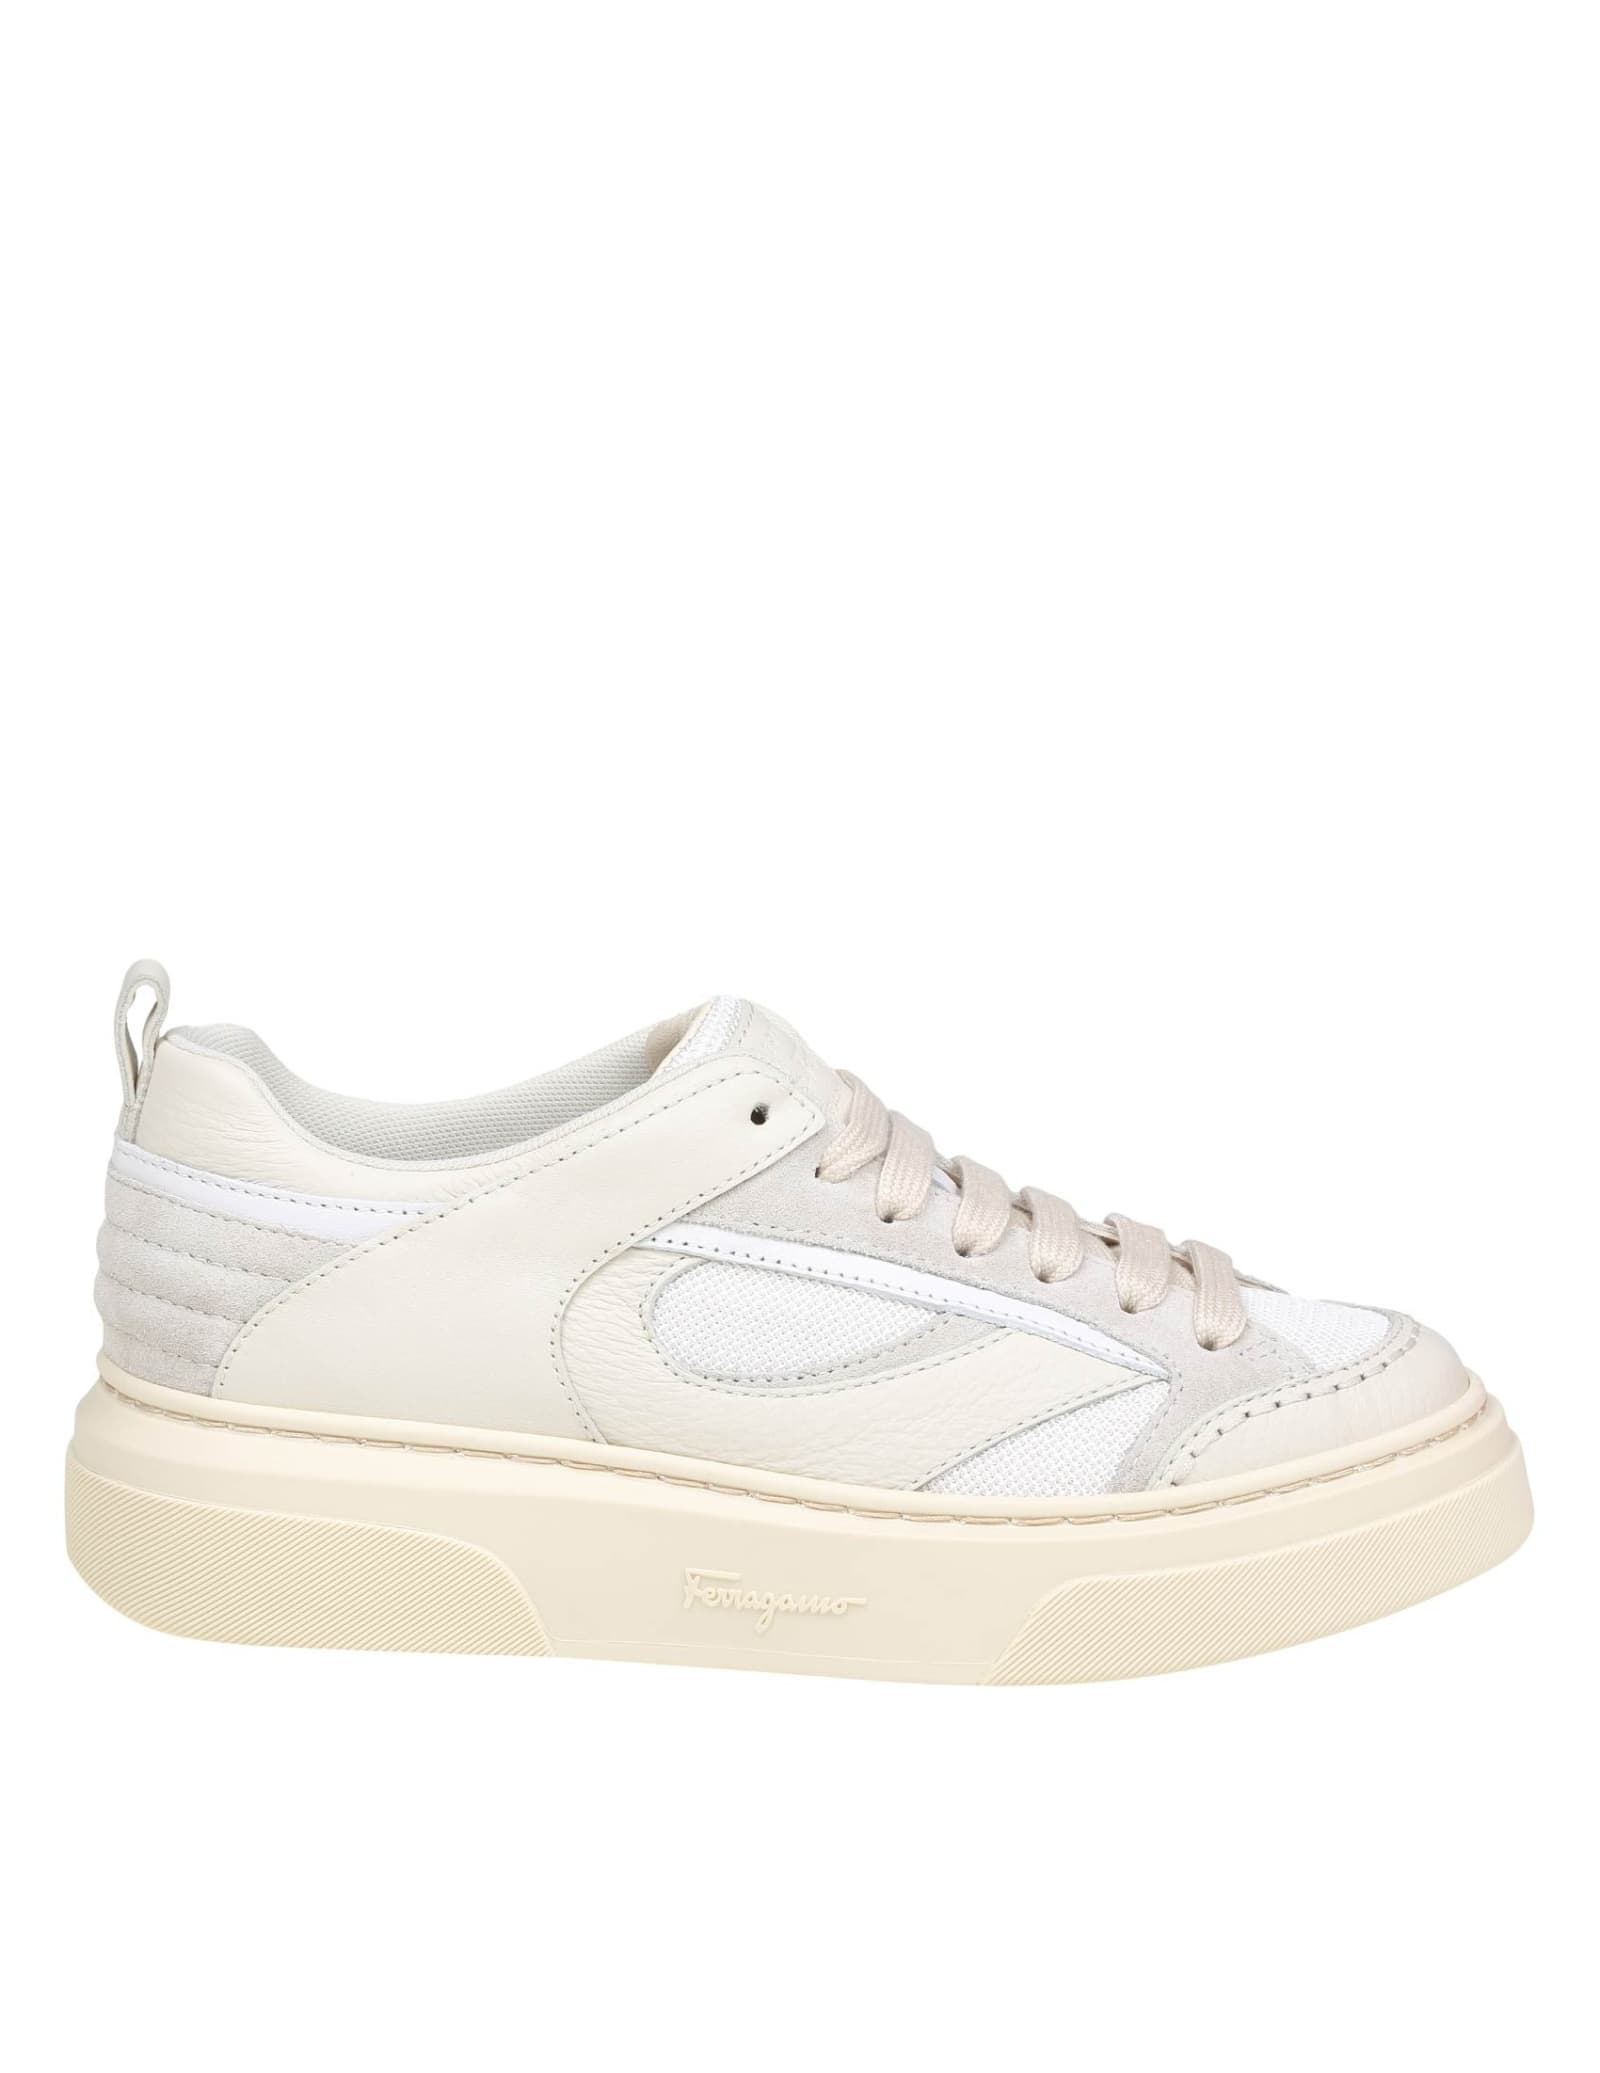 FERRAGAMO CASSINA MIX SNEAKERS IN LEATHER AND FABRIC